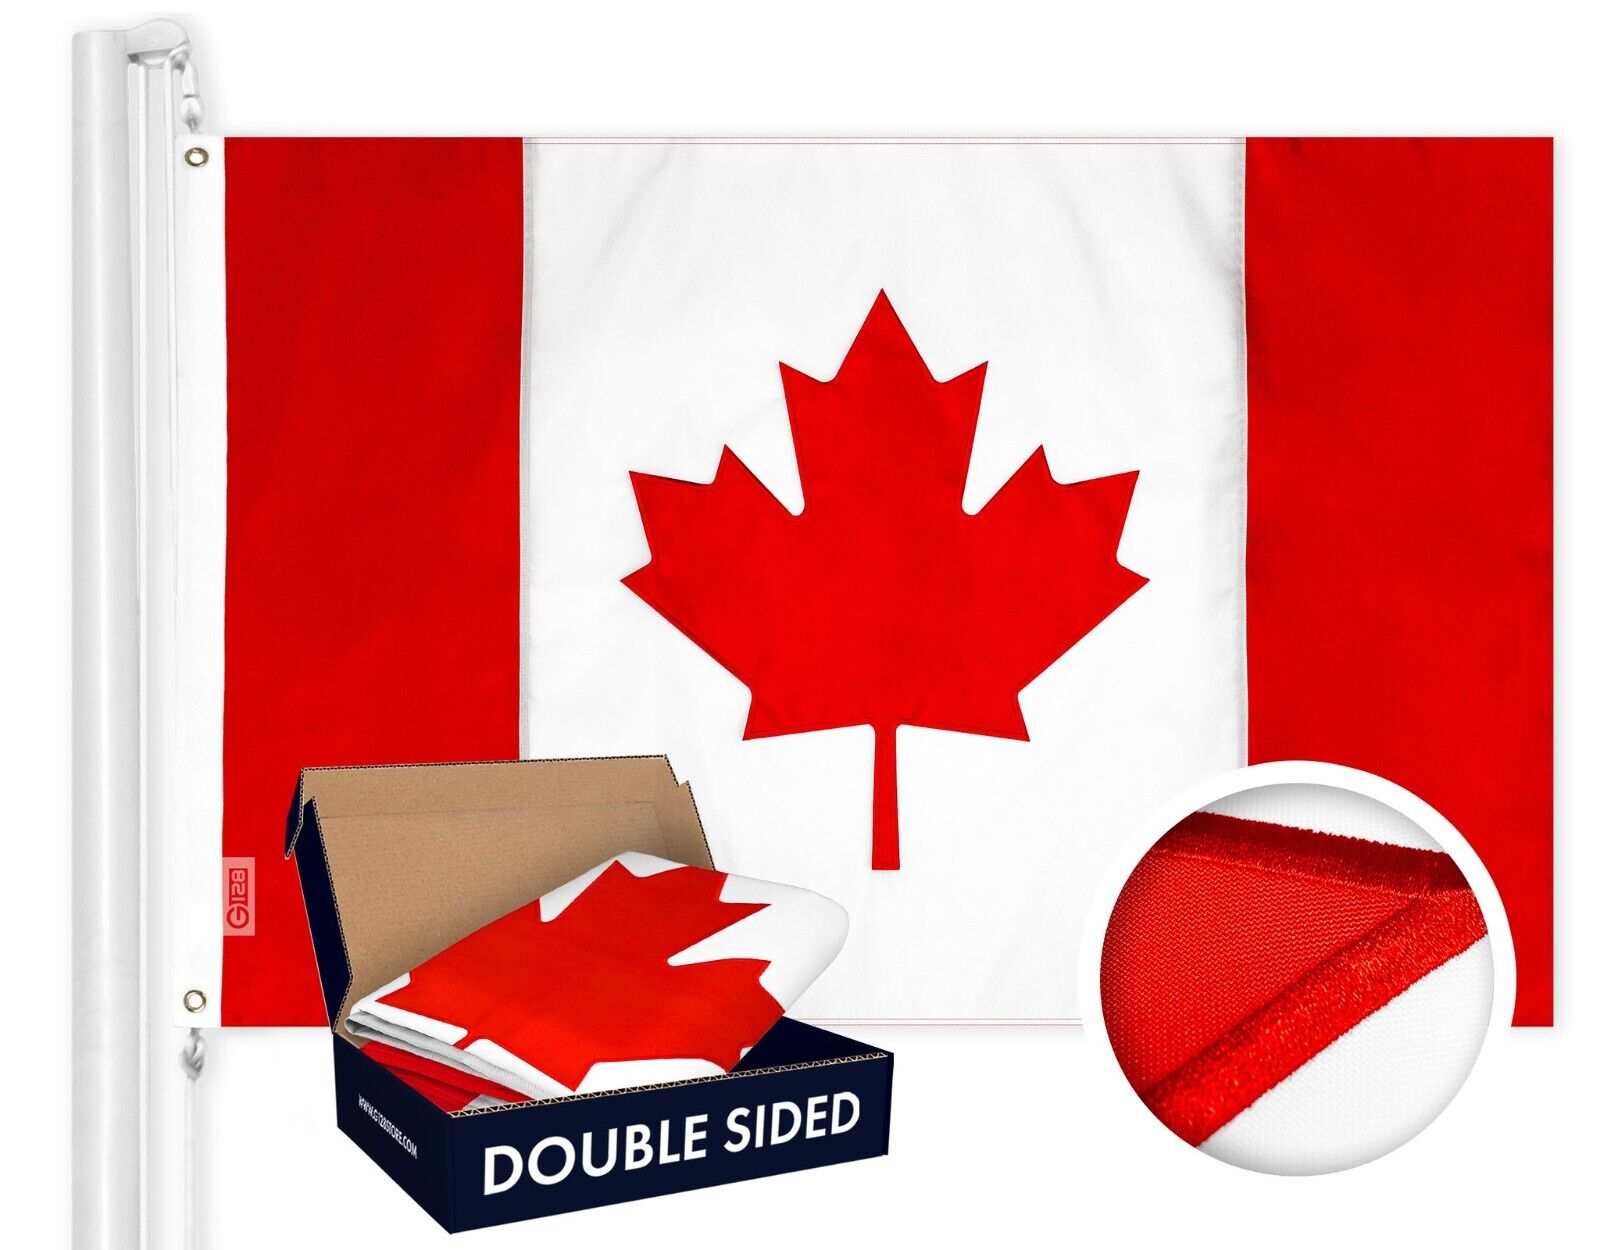 G128 Canada (Canadian) Flag 3x5 Ft - DOUBLE SIDED, Embroidered Polyester